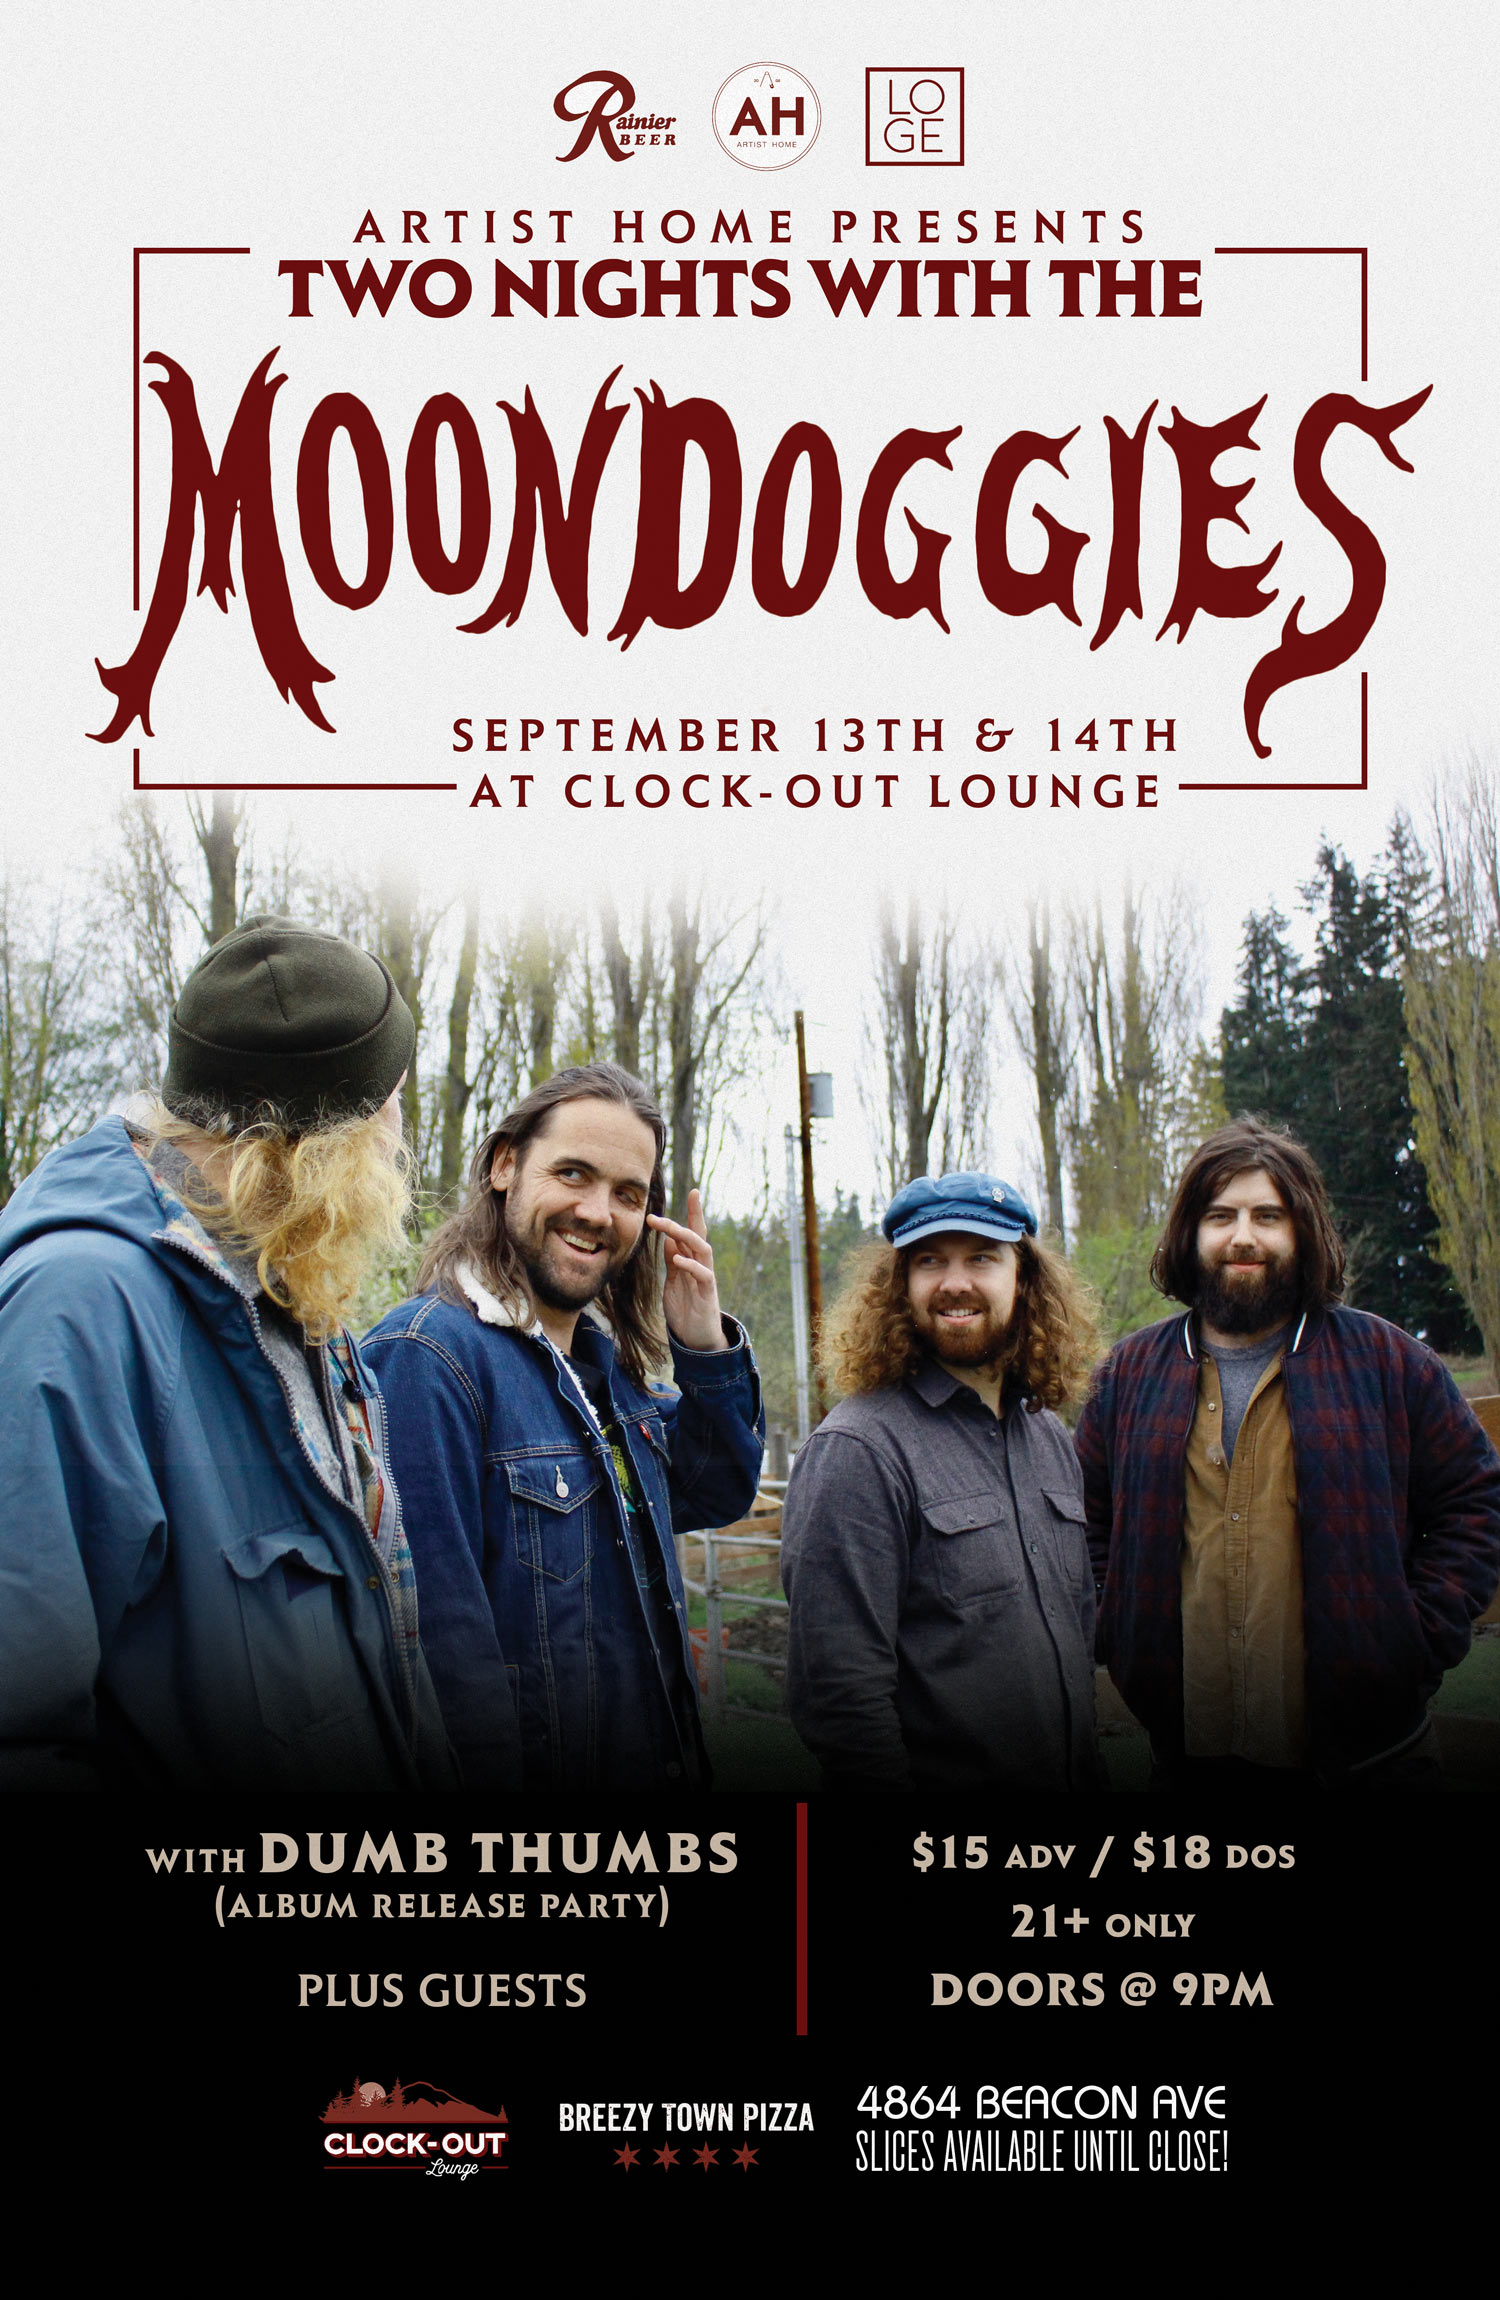 Artist Home Presents 2 Nights with the Moondoggies and Dumb Thumbs at Clock Out Lounge